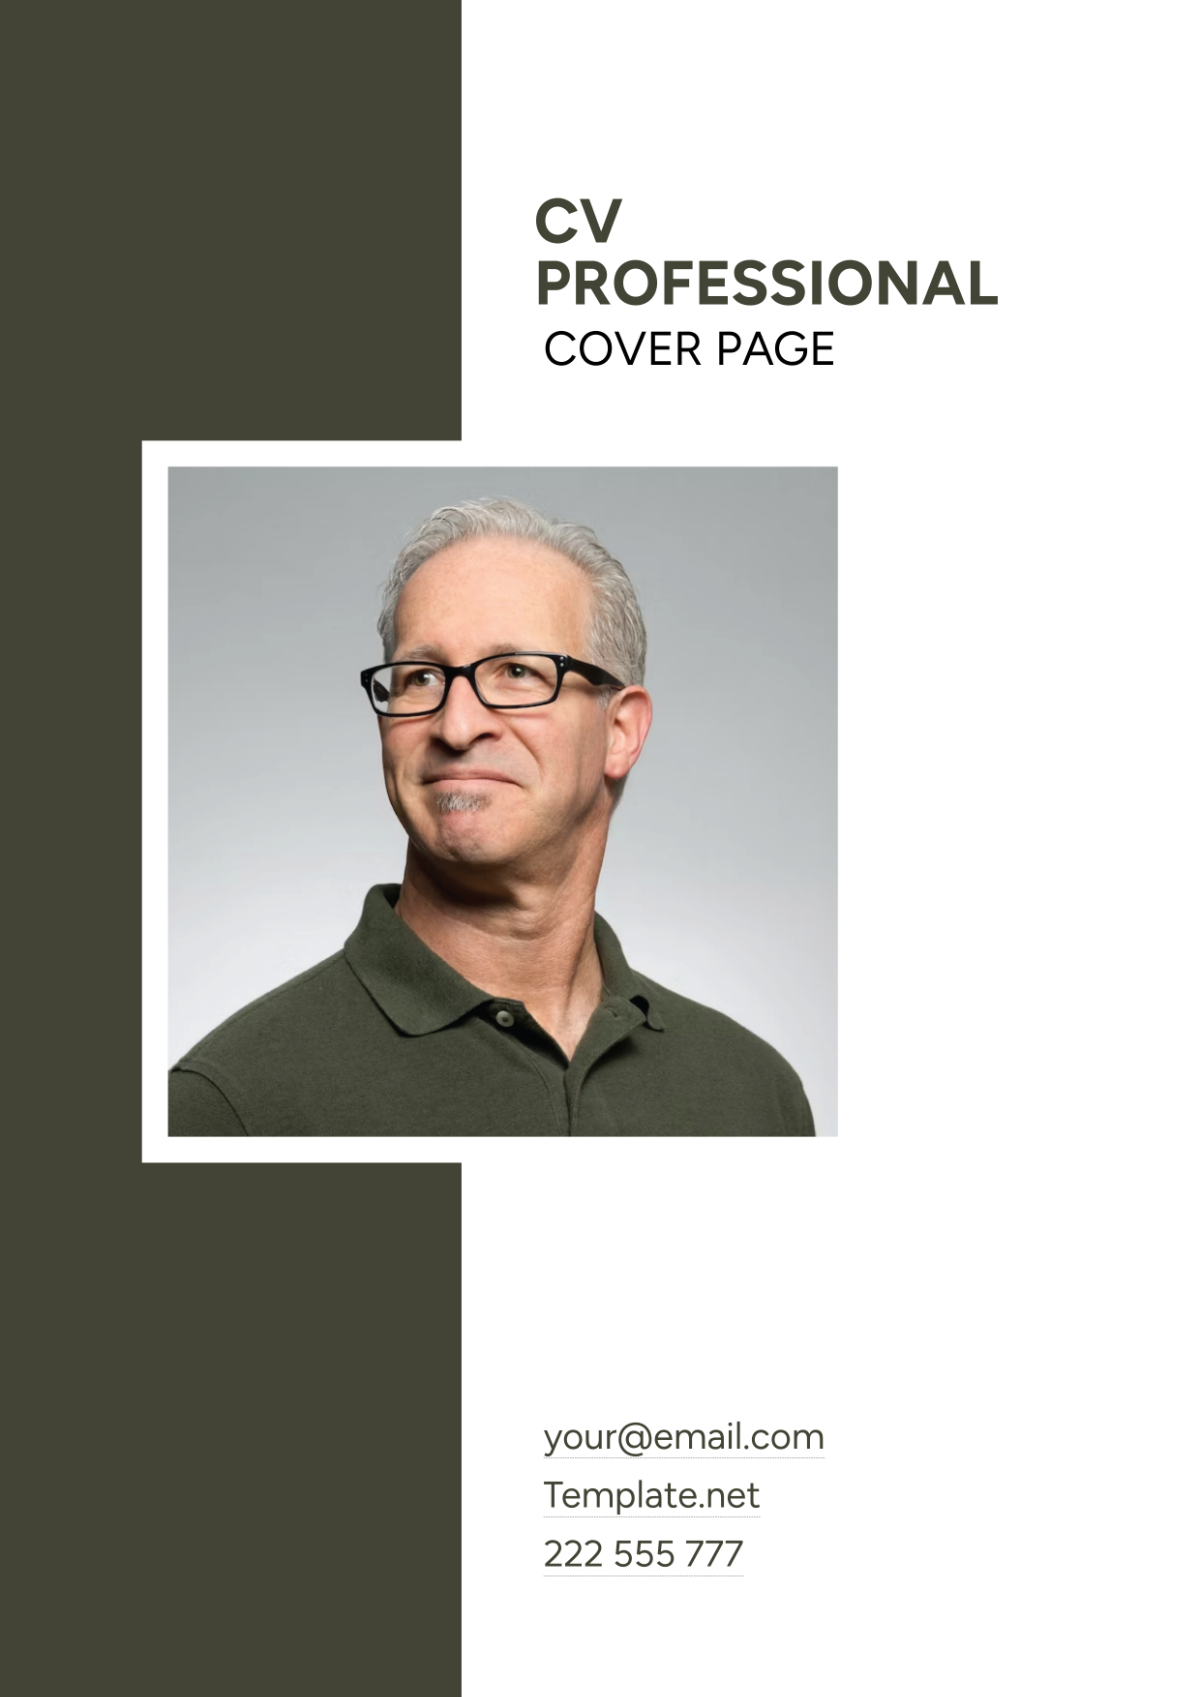 CV Professional Cover Page